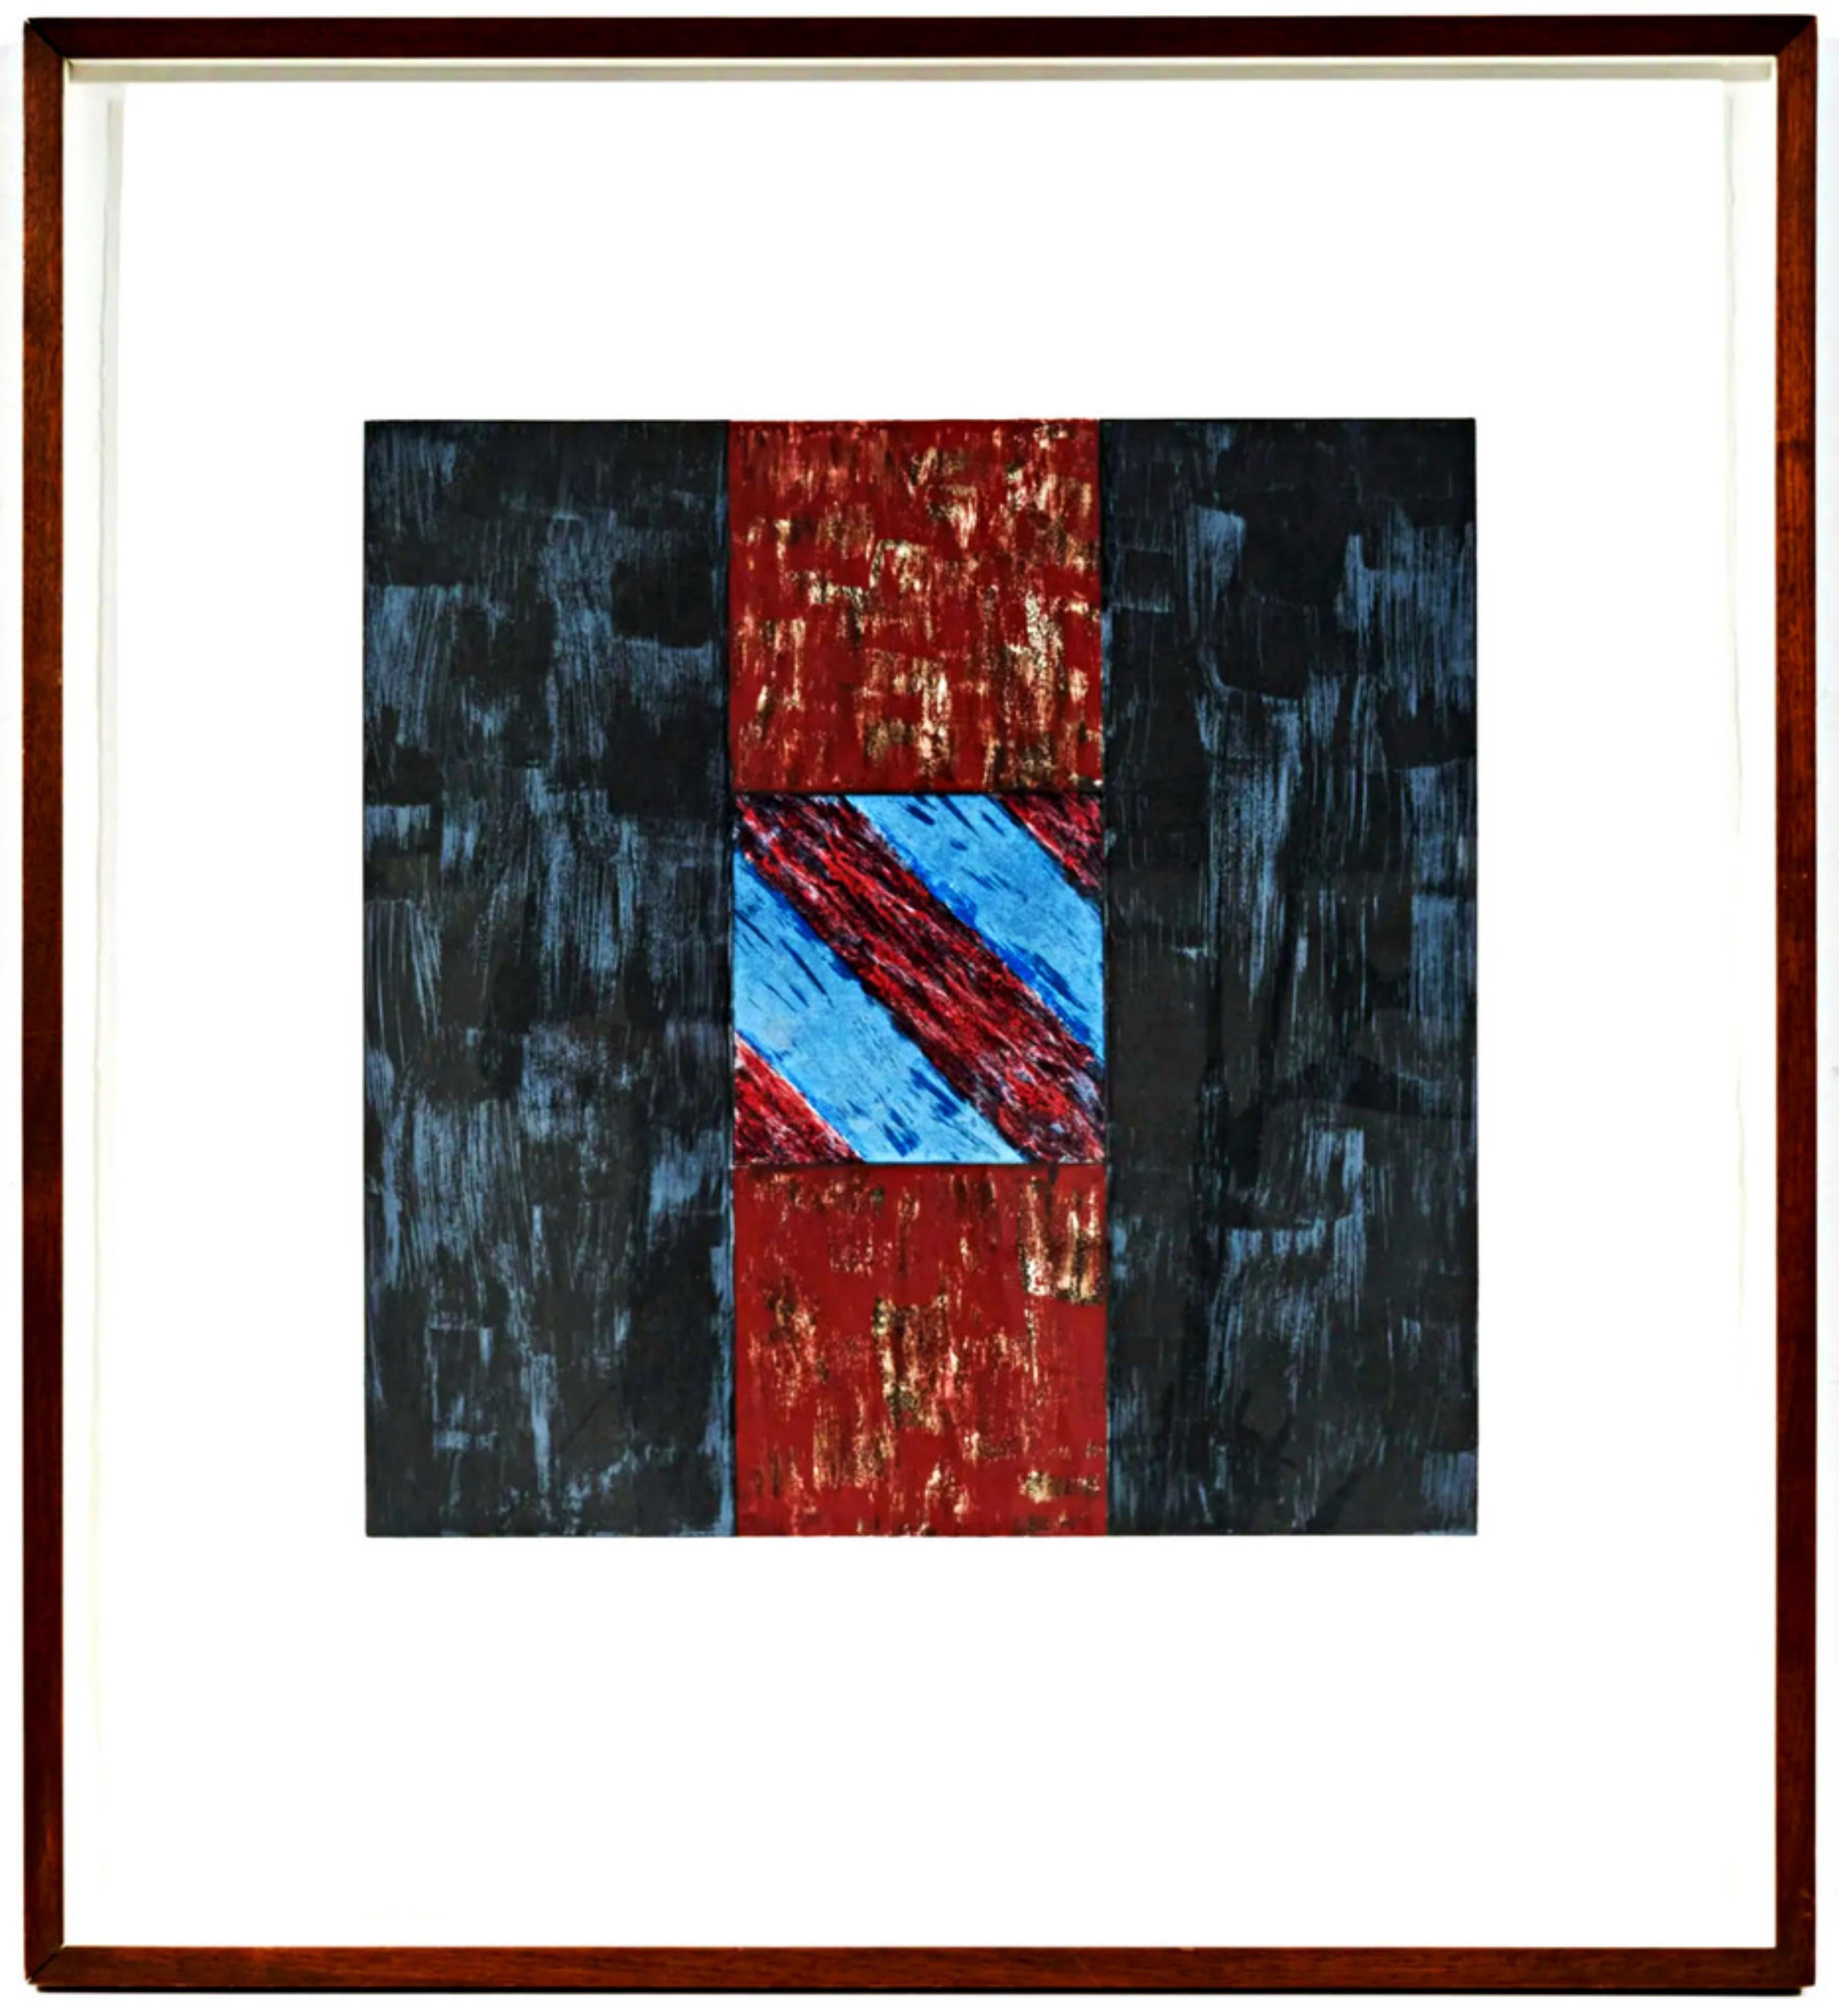 Sean Scully Abstract Print - Square Light II